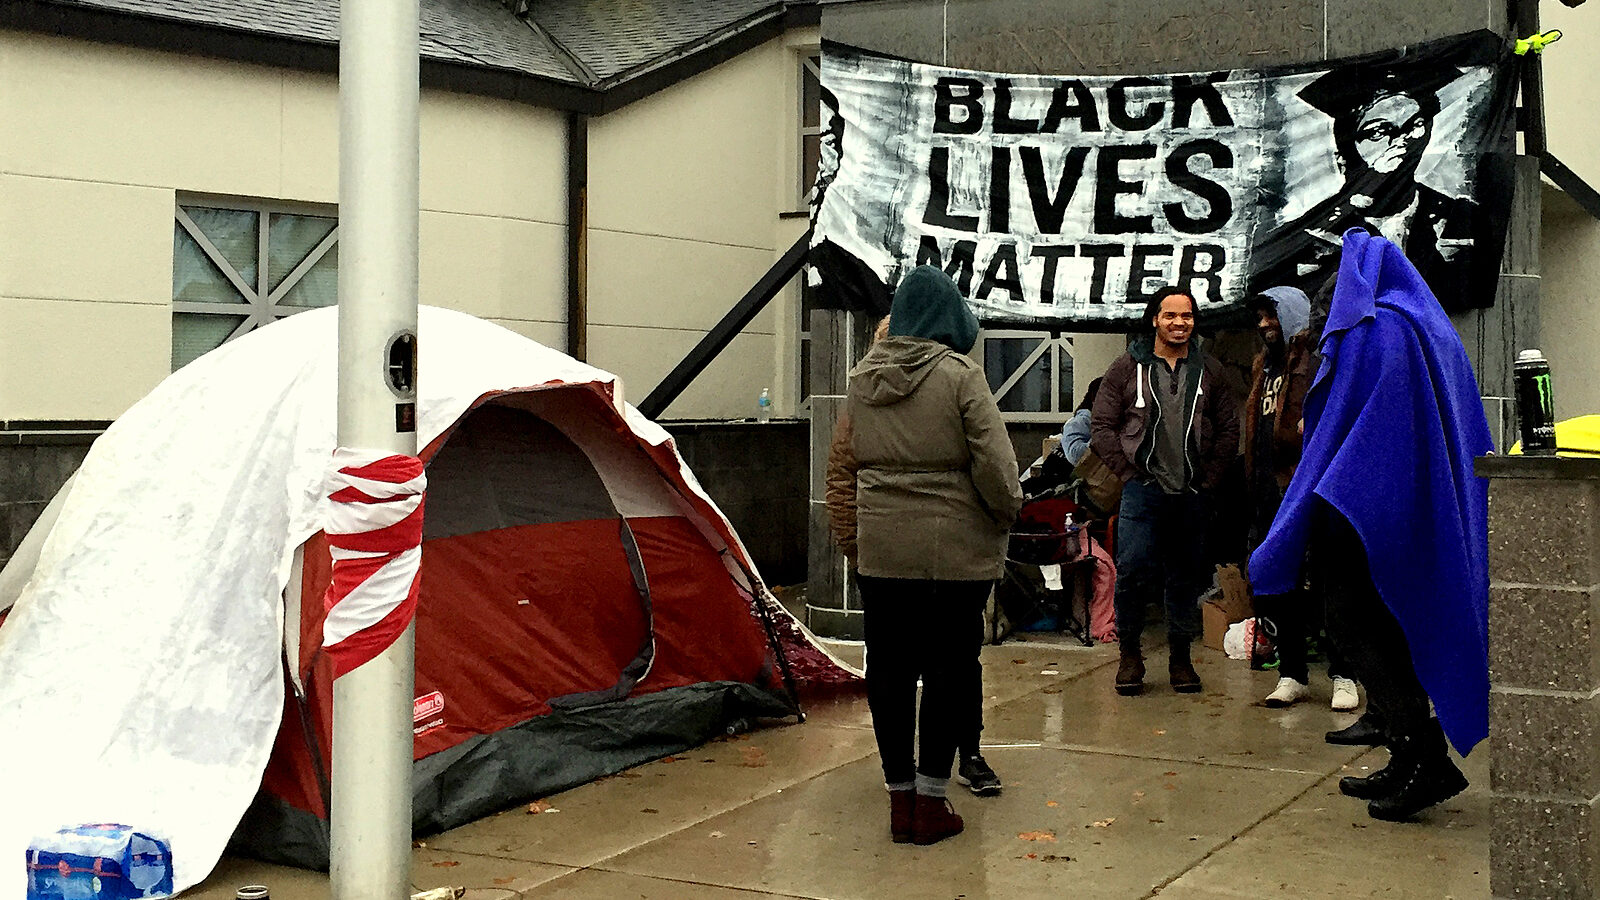 A group of protesters gather at the front entrance to the 4th Police Precinct station, Monday, Nov. 16, 2015, in Minneapolis, after a man was shot by Minneapolis police early Sunday morning. Community members and activists on Monday at a news conference demanded that police release the name of the officer involved as well as any video of the incident. (AP Photo/Kyle Potter)